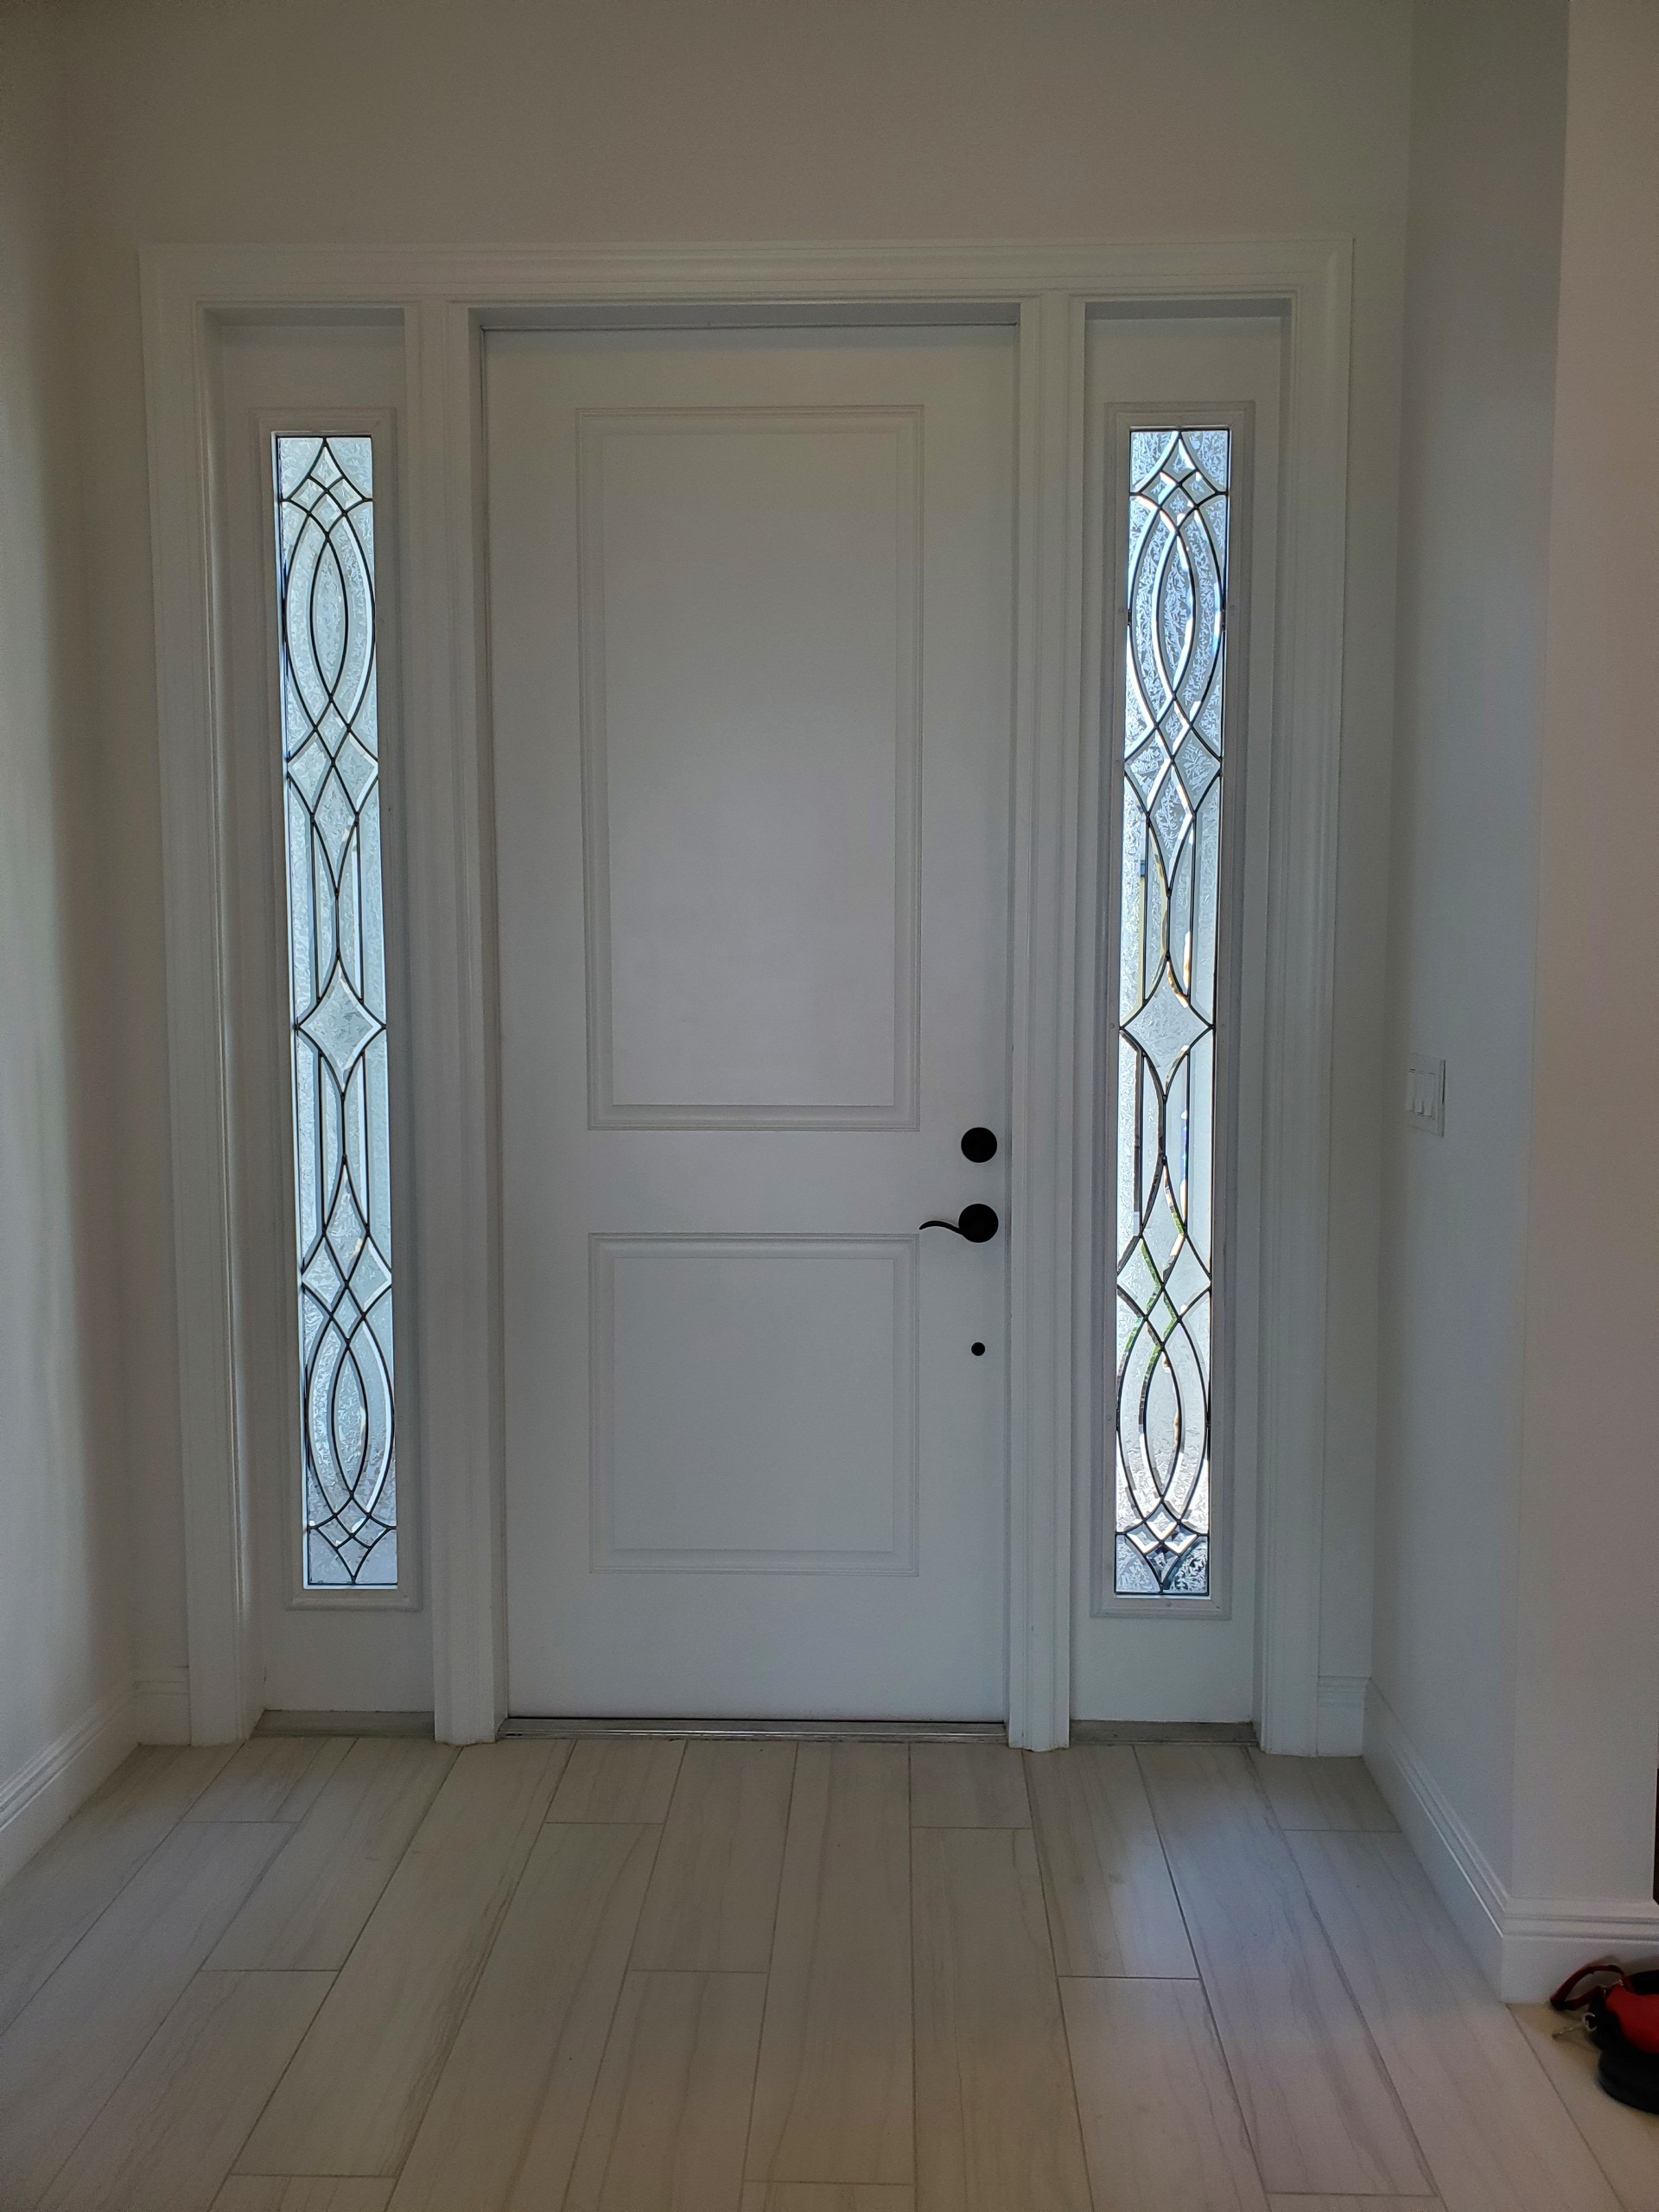 Small stained glass windows in entryway with clear textured glass in a Contemporary style.